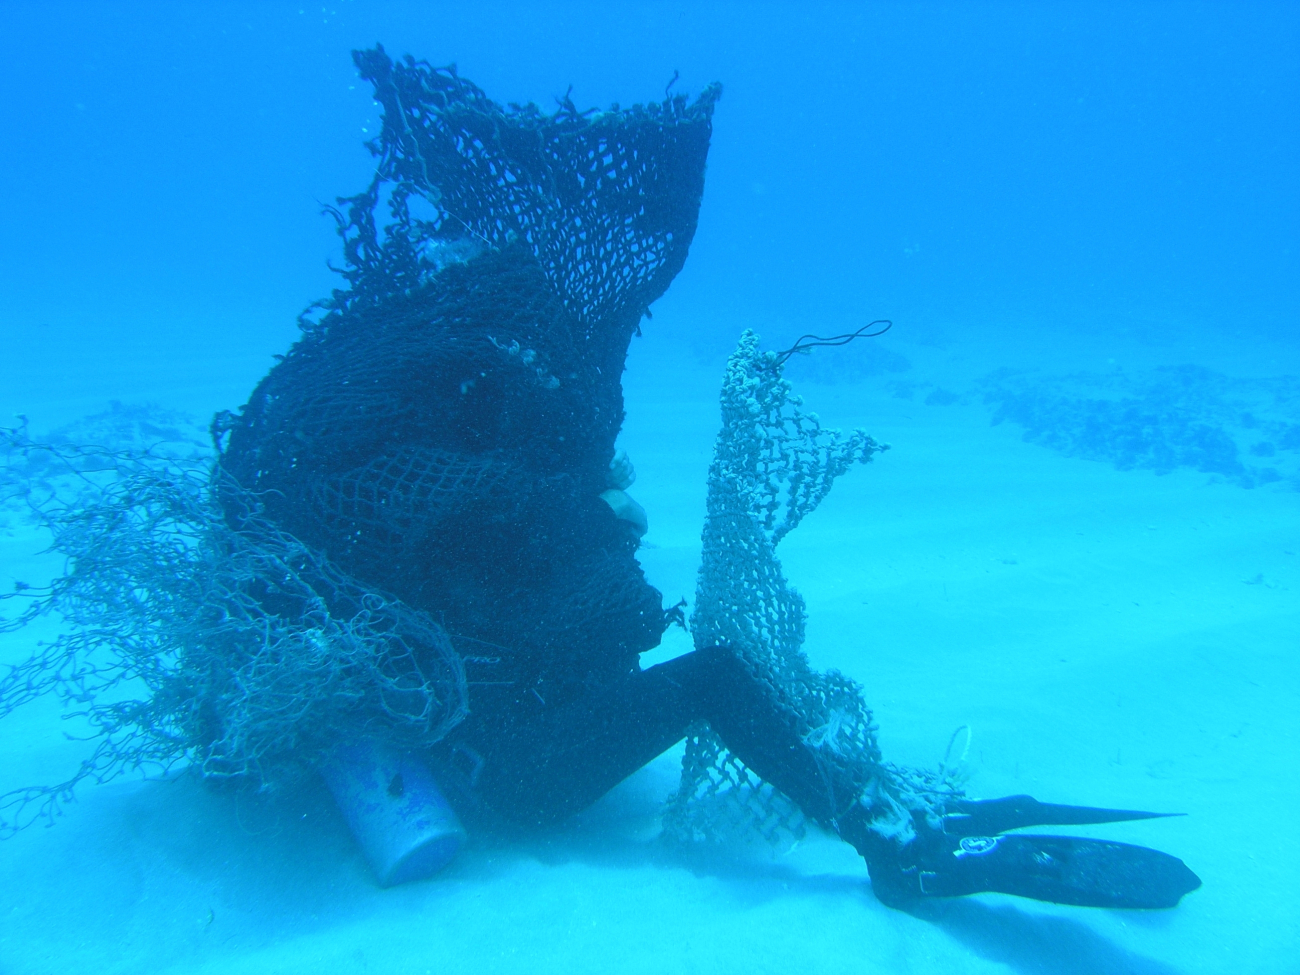 As part of Marine Removal Debris Diver training, Joel Paschal is entangledin the dreaded Net Monster and must free himself while wearing a blacked-out mask